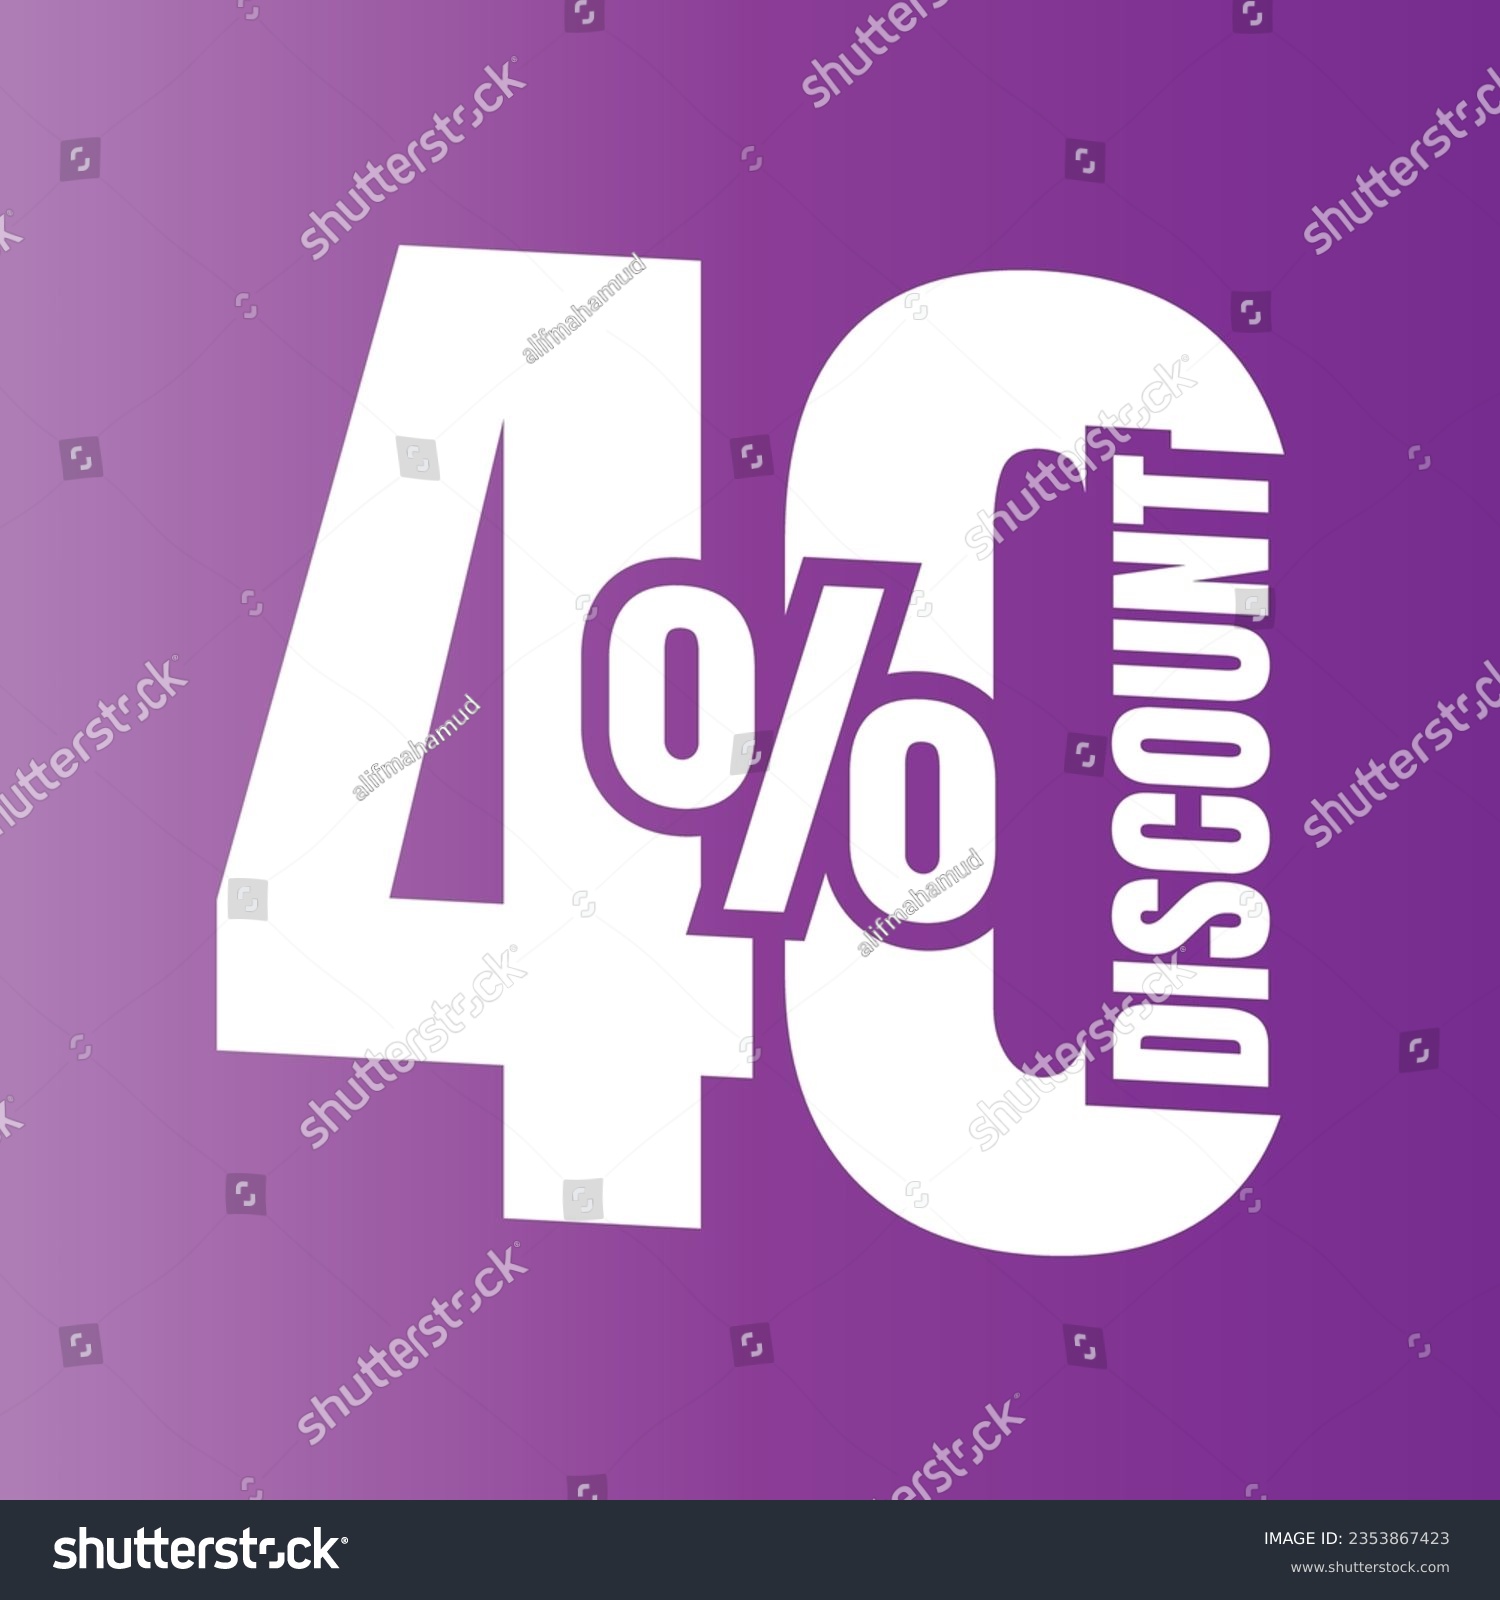 SVG of 40 percent discount deal icon, 40% special offer discount vector, 40 percent sale price reduction offer, Friday shopping sale discount percentage design svg